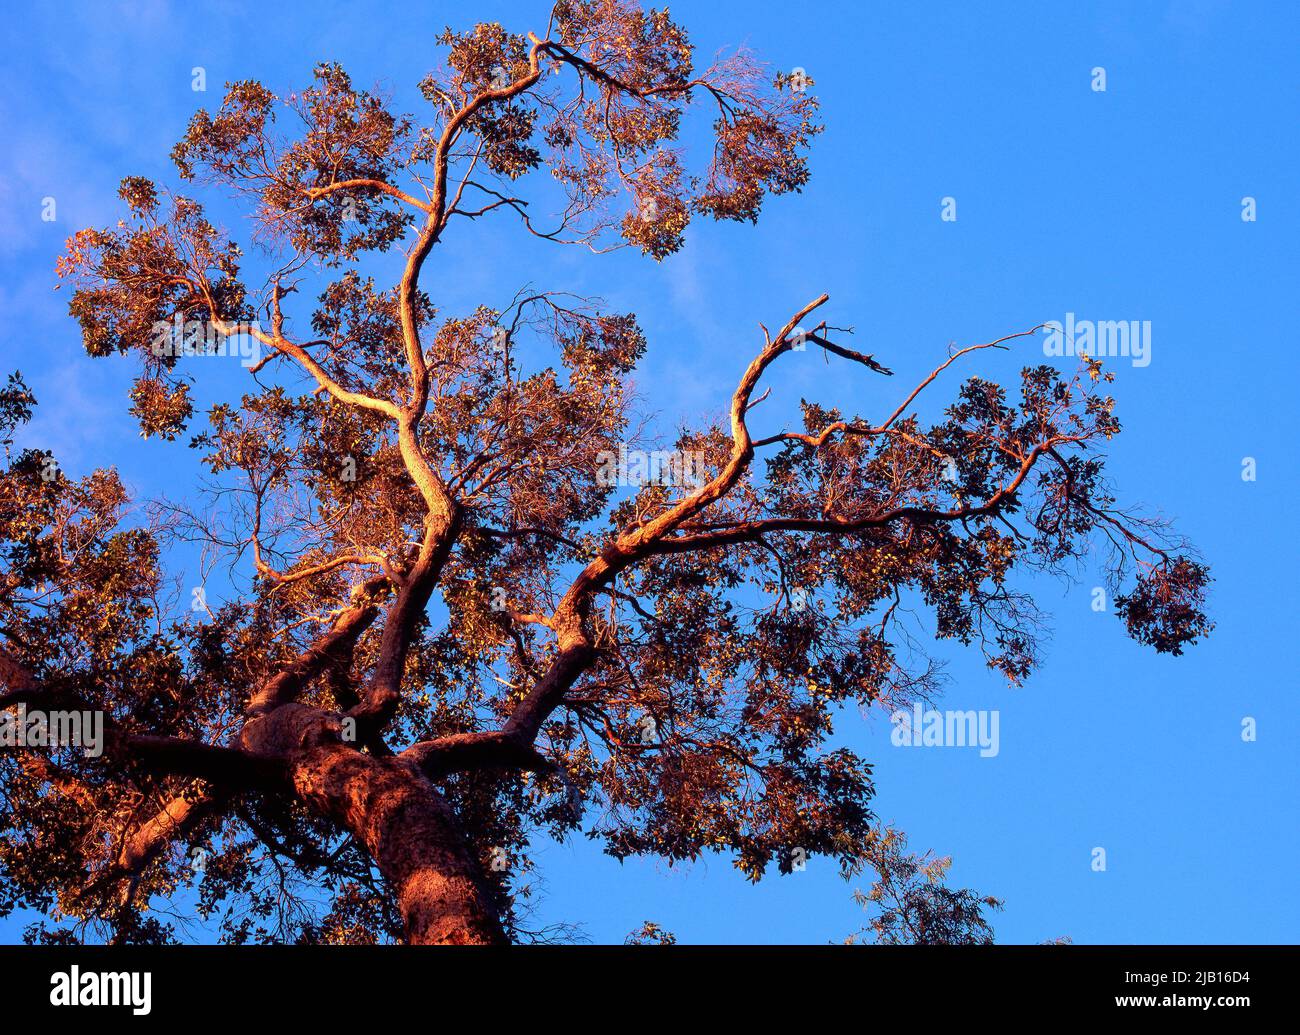 Looking up to a Eucalyptus tree against a blue sky Stock Photo